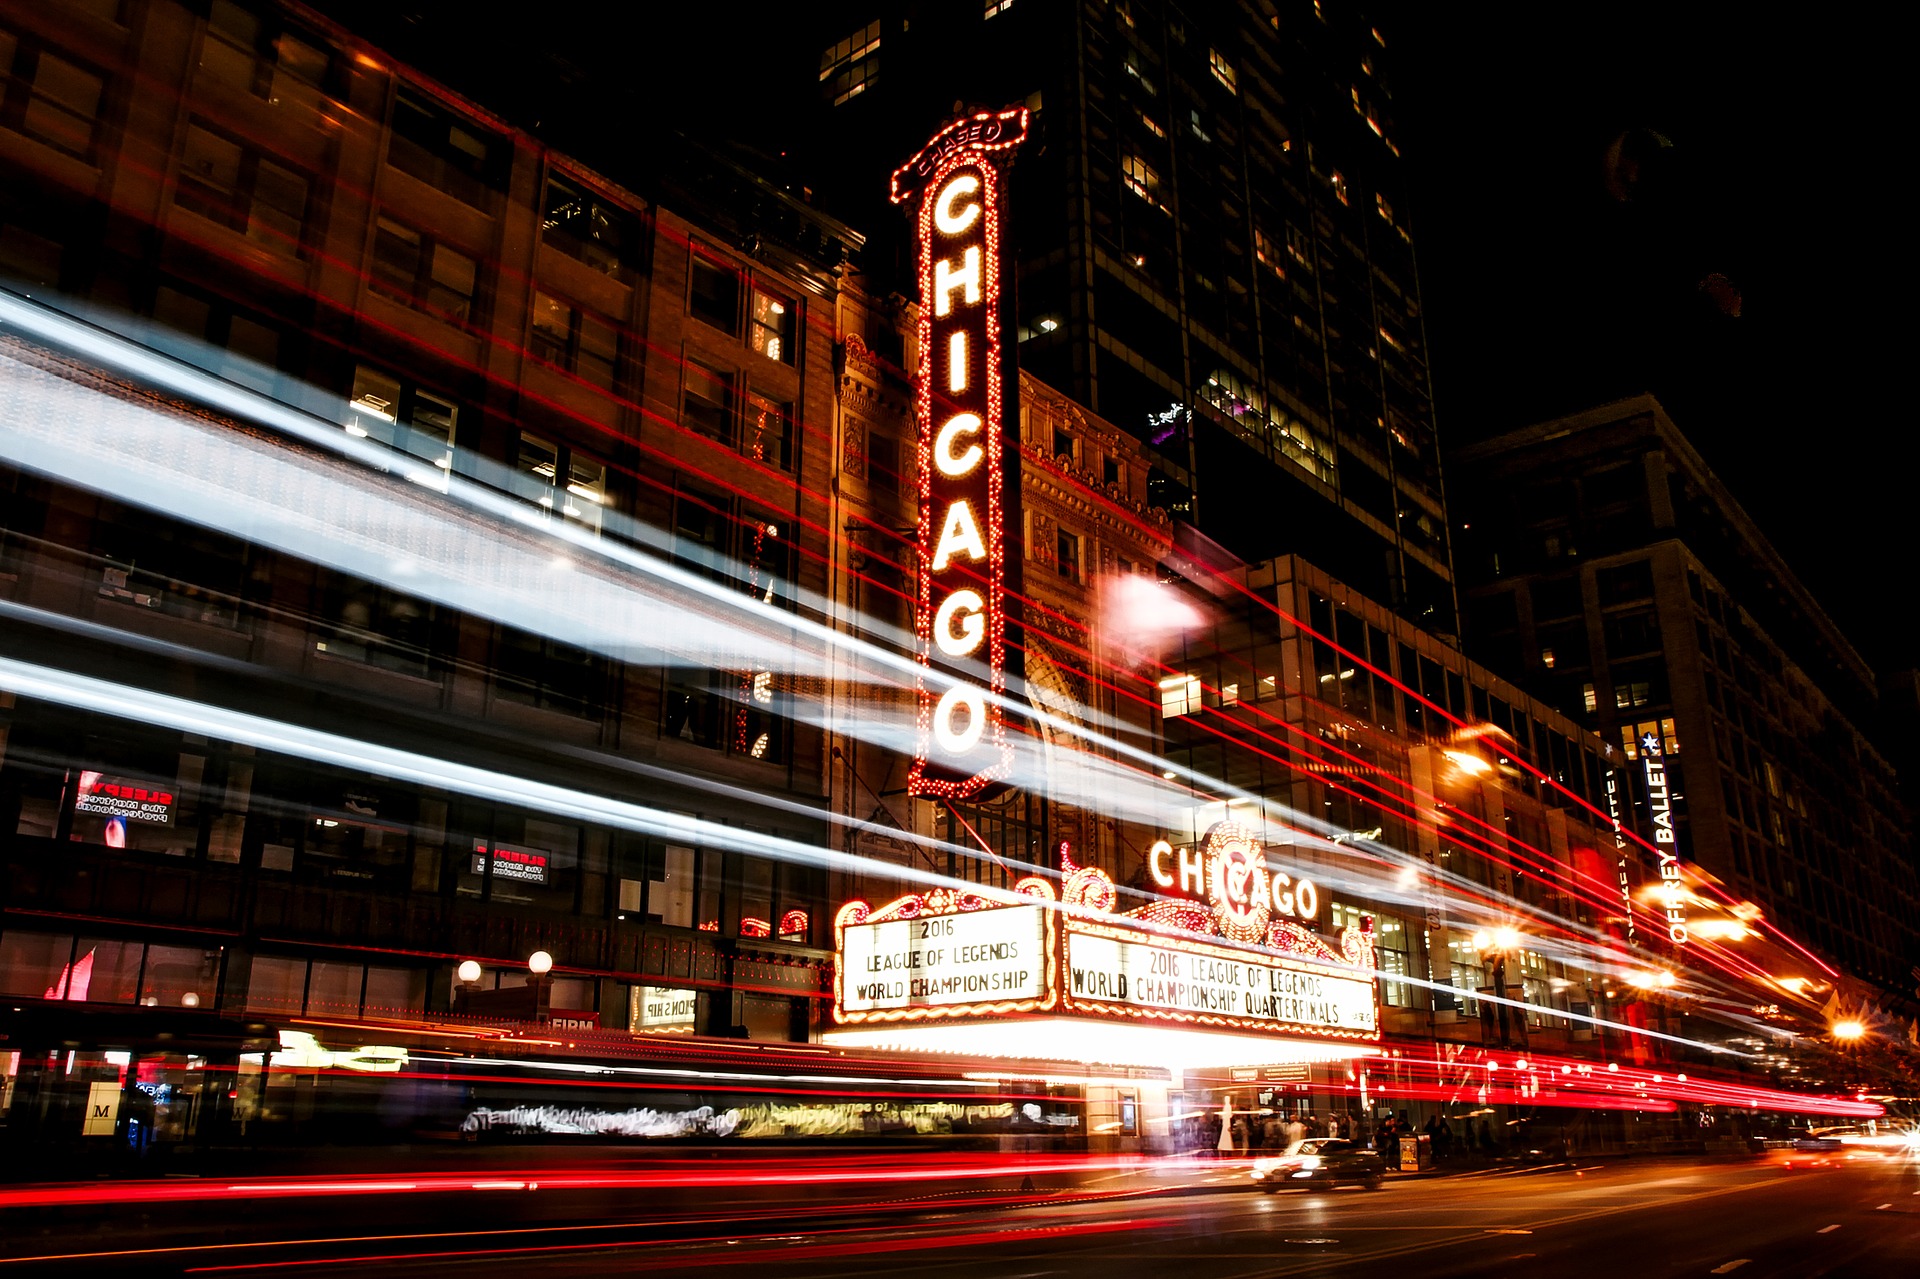 Outside a Chicago theatre, with a huge 'Chicago' sign outside